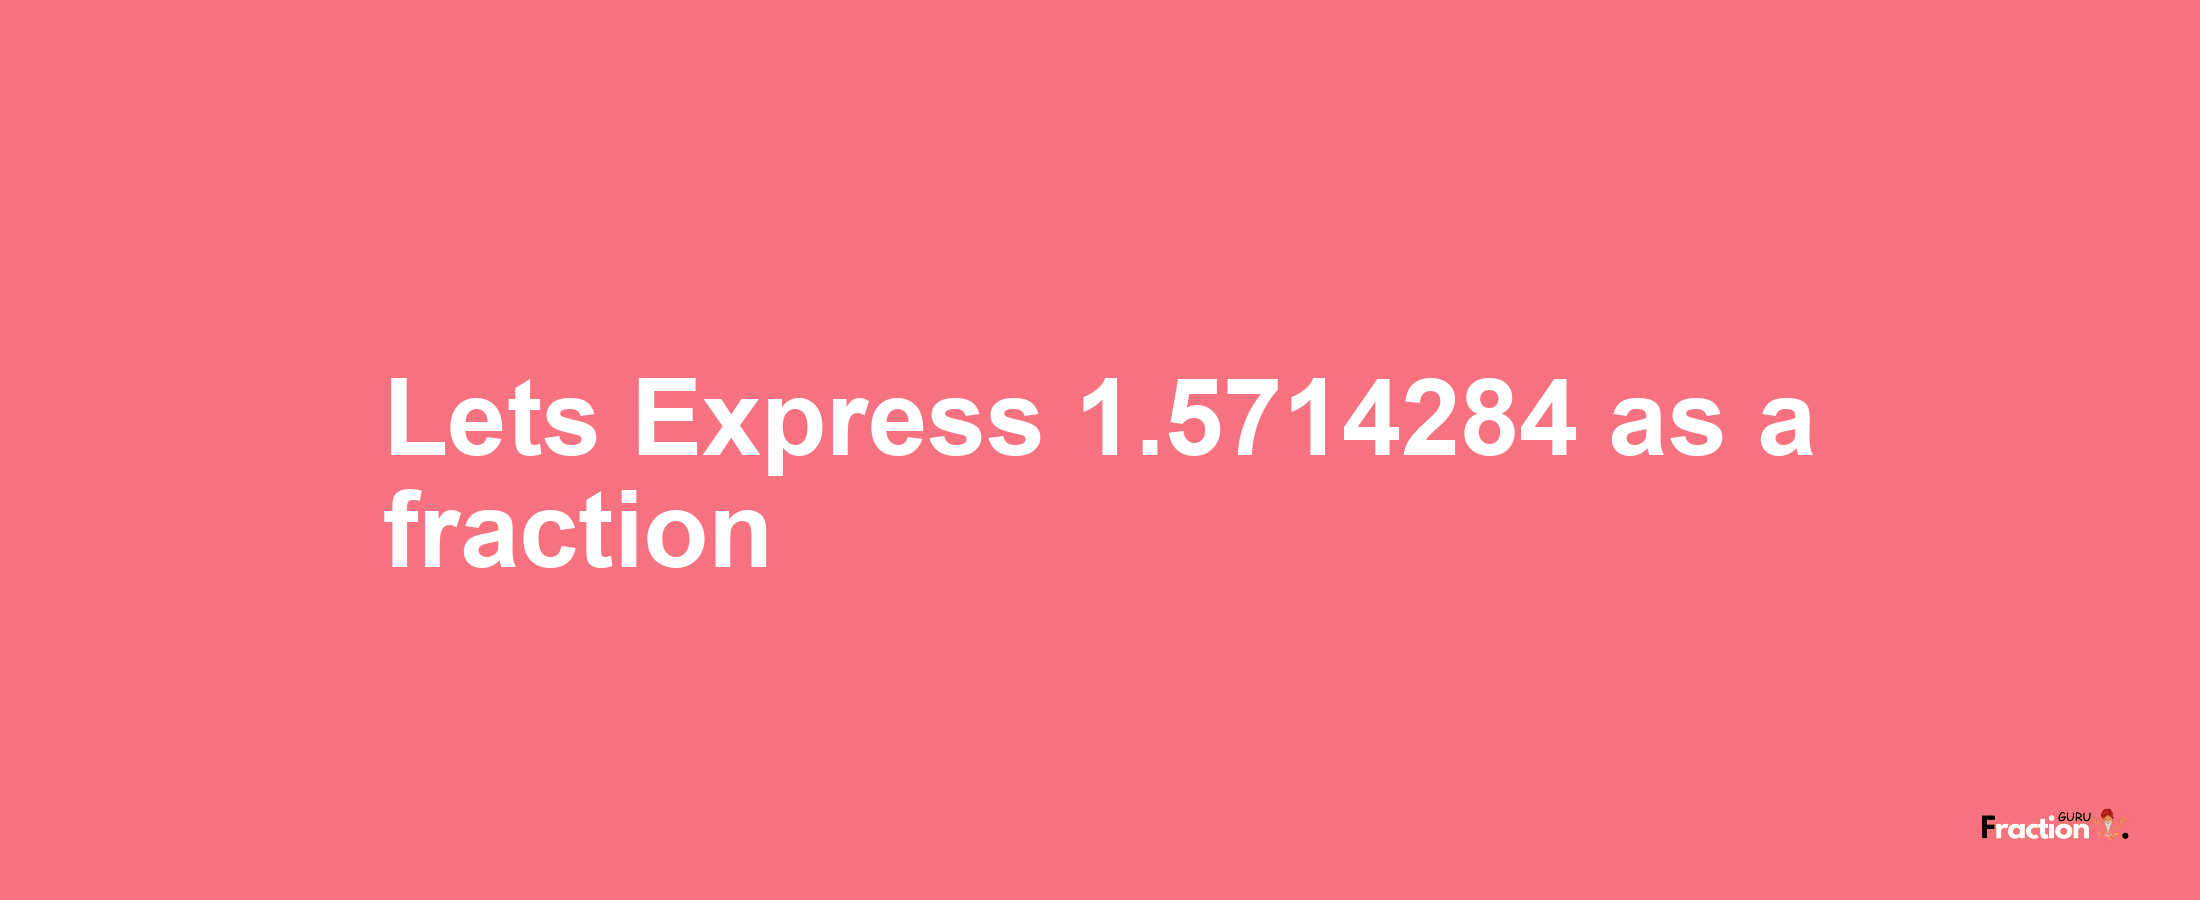 Lets Express 1.5714284 as afraction